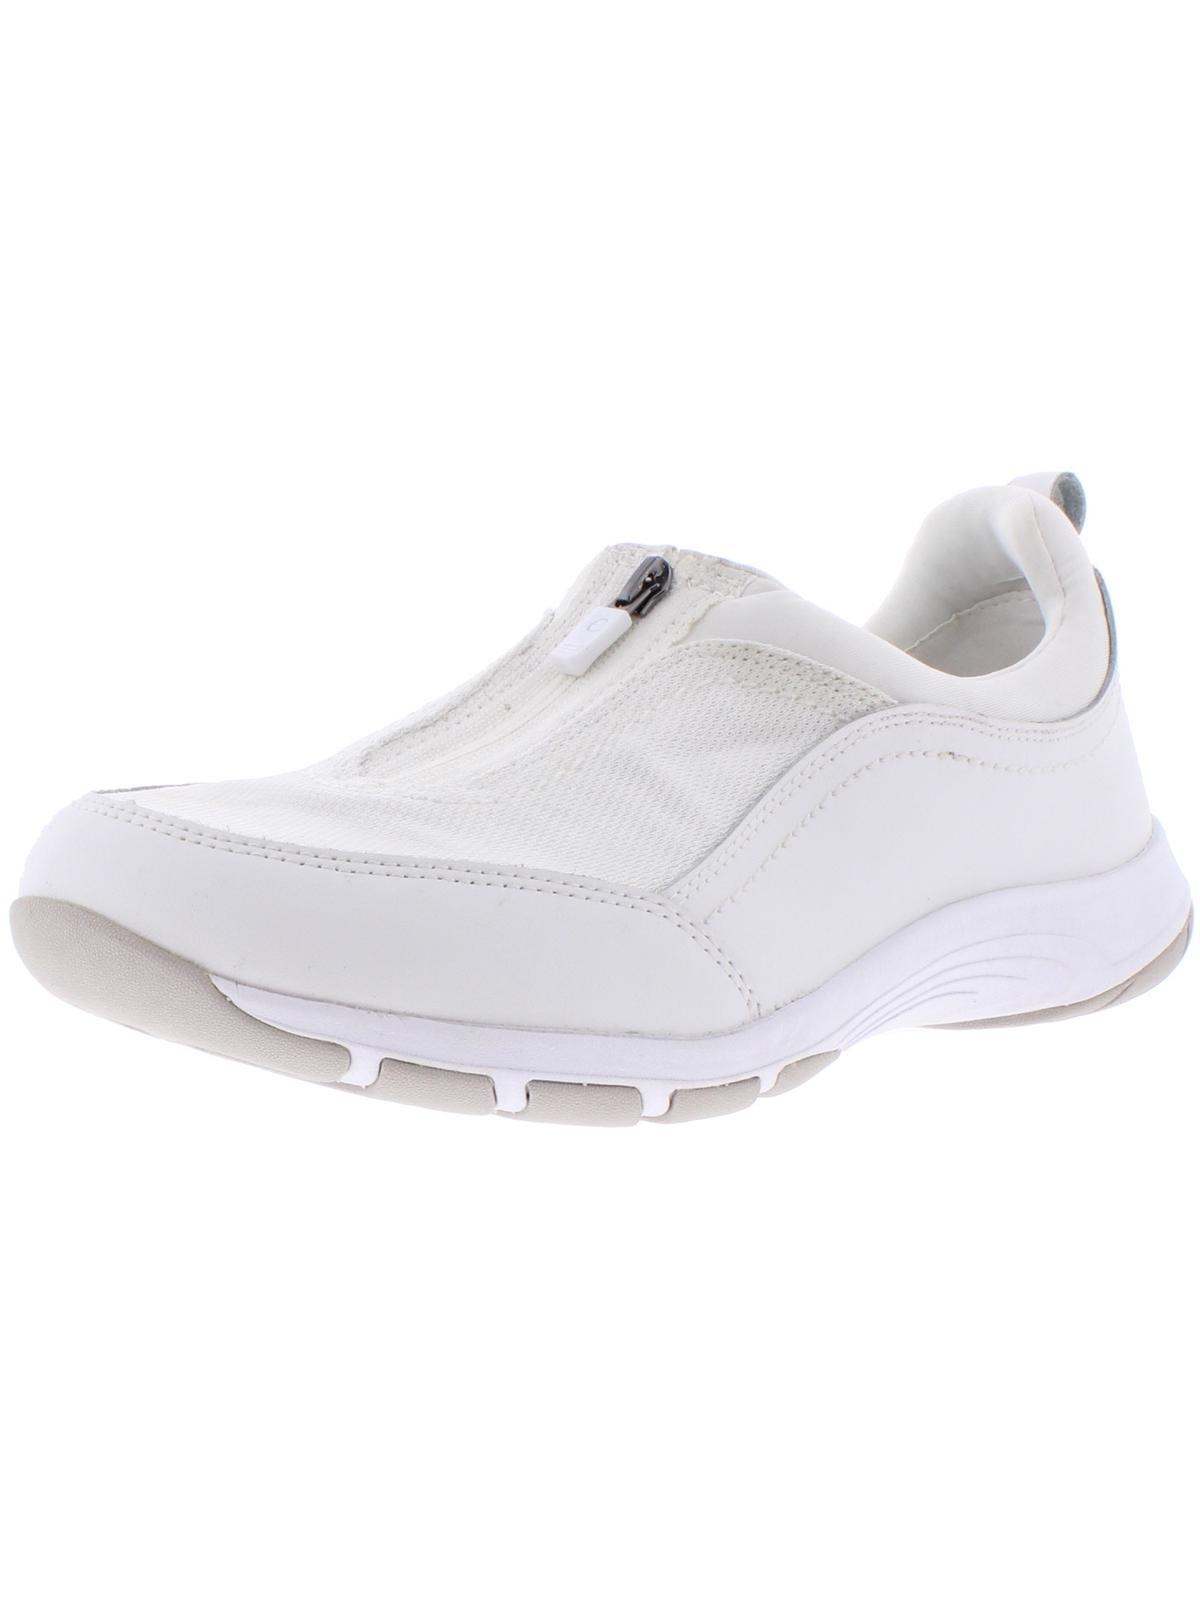 Easy Spirit Cave 8 Comfort Insole Workout Slip-on Sneakers in White | Lyst